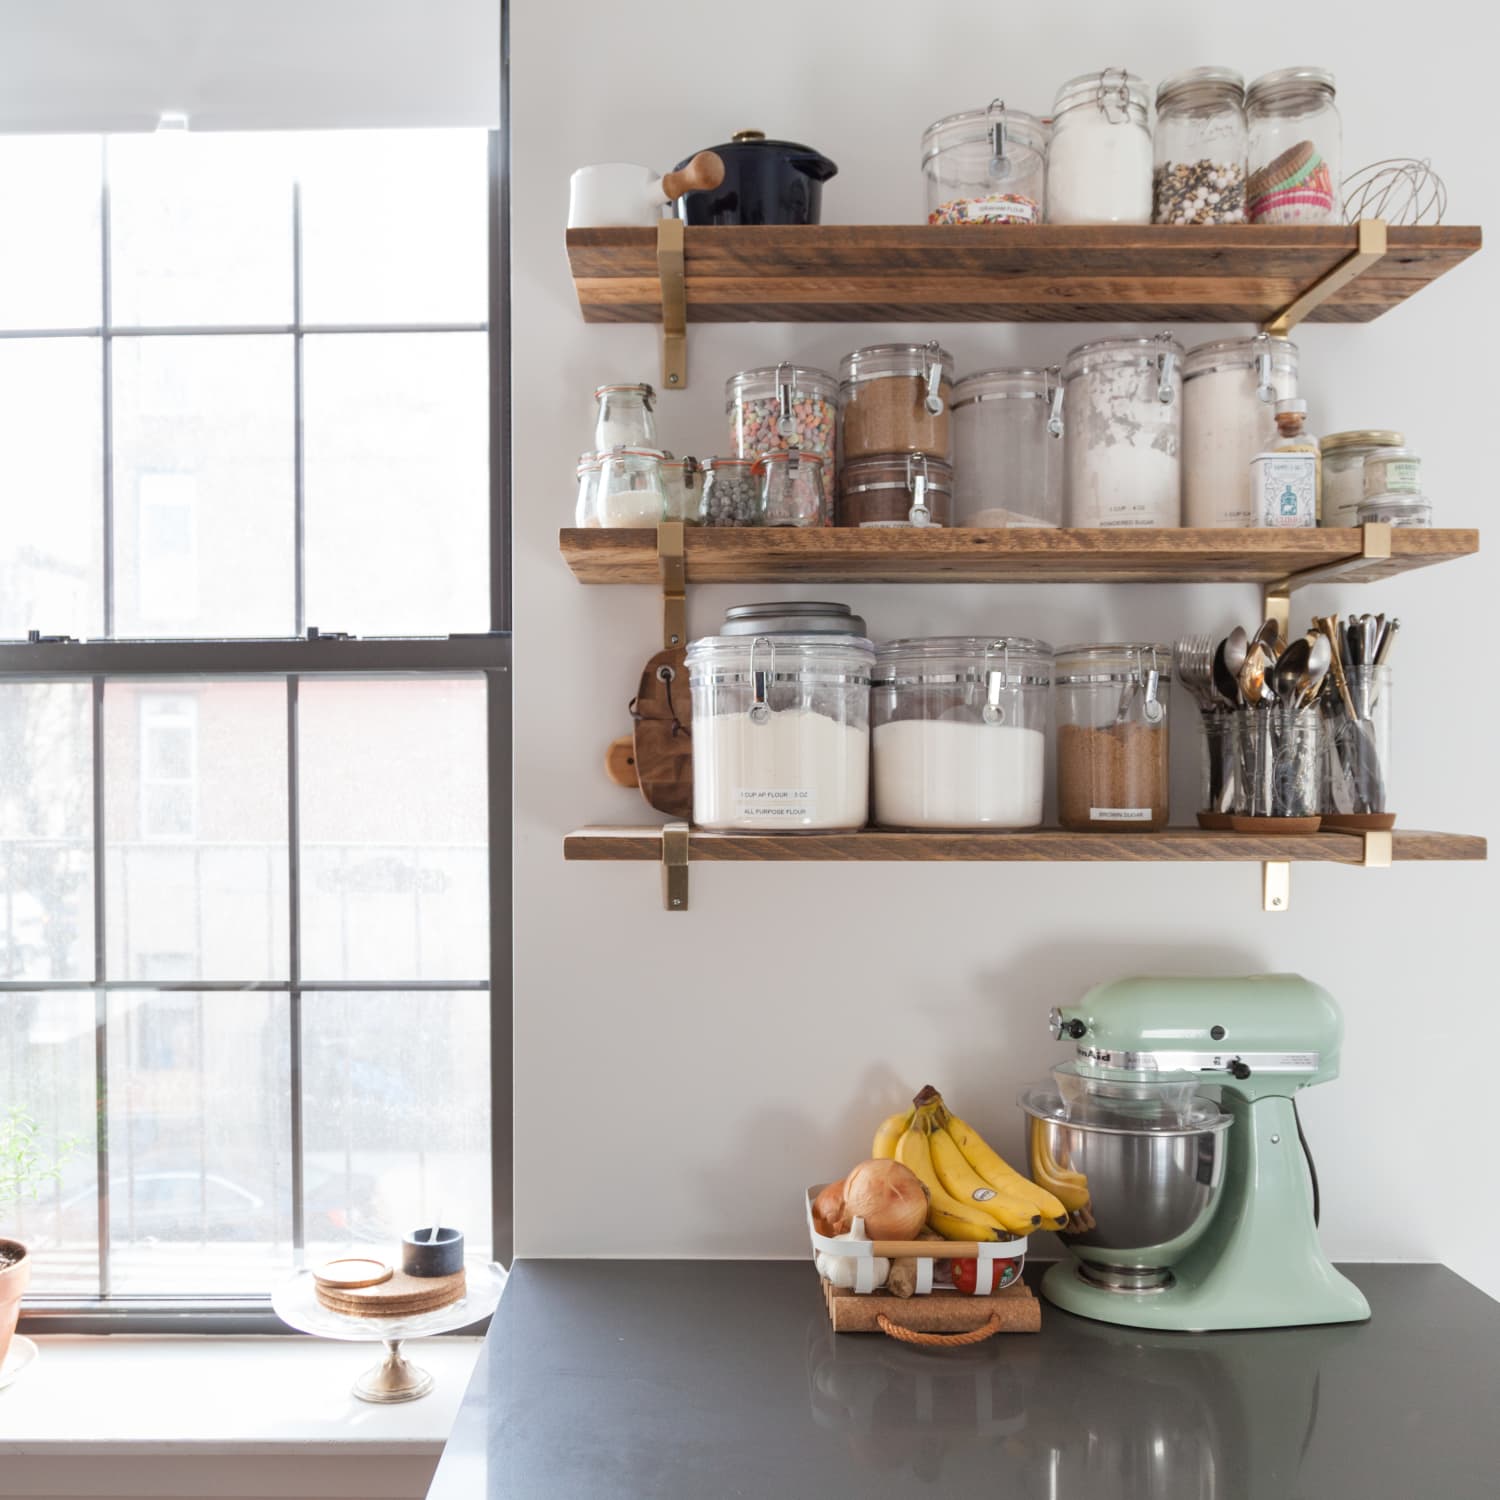 How to Support Your Favorite Independent Kitchen Supply Store Right Now